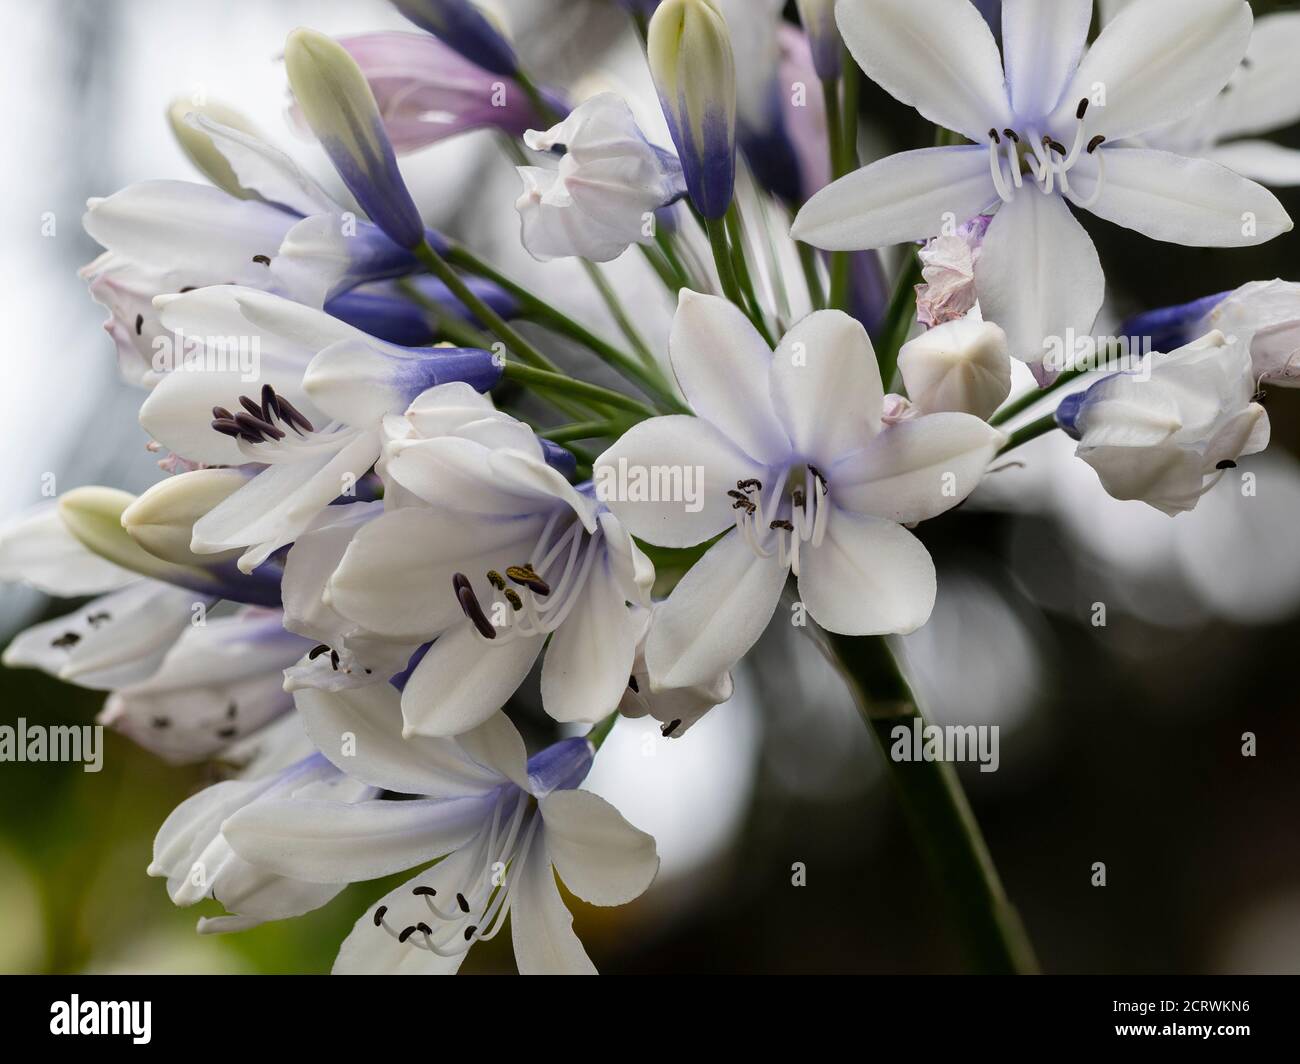 Blue and white tubular blooms in the flower head of the hardy perennial Agapanthus 'Twister' Stock Photo